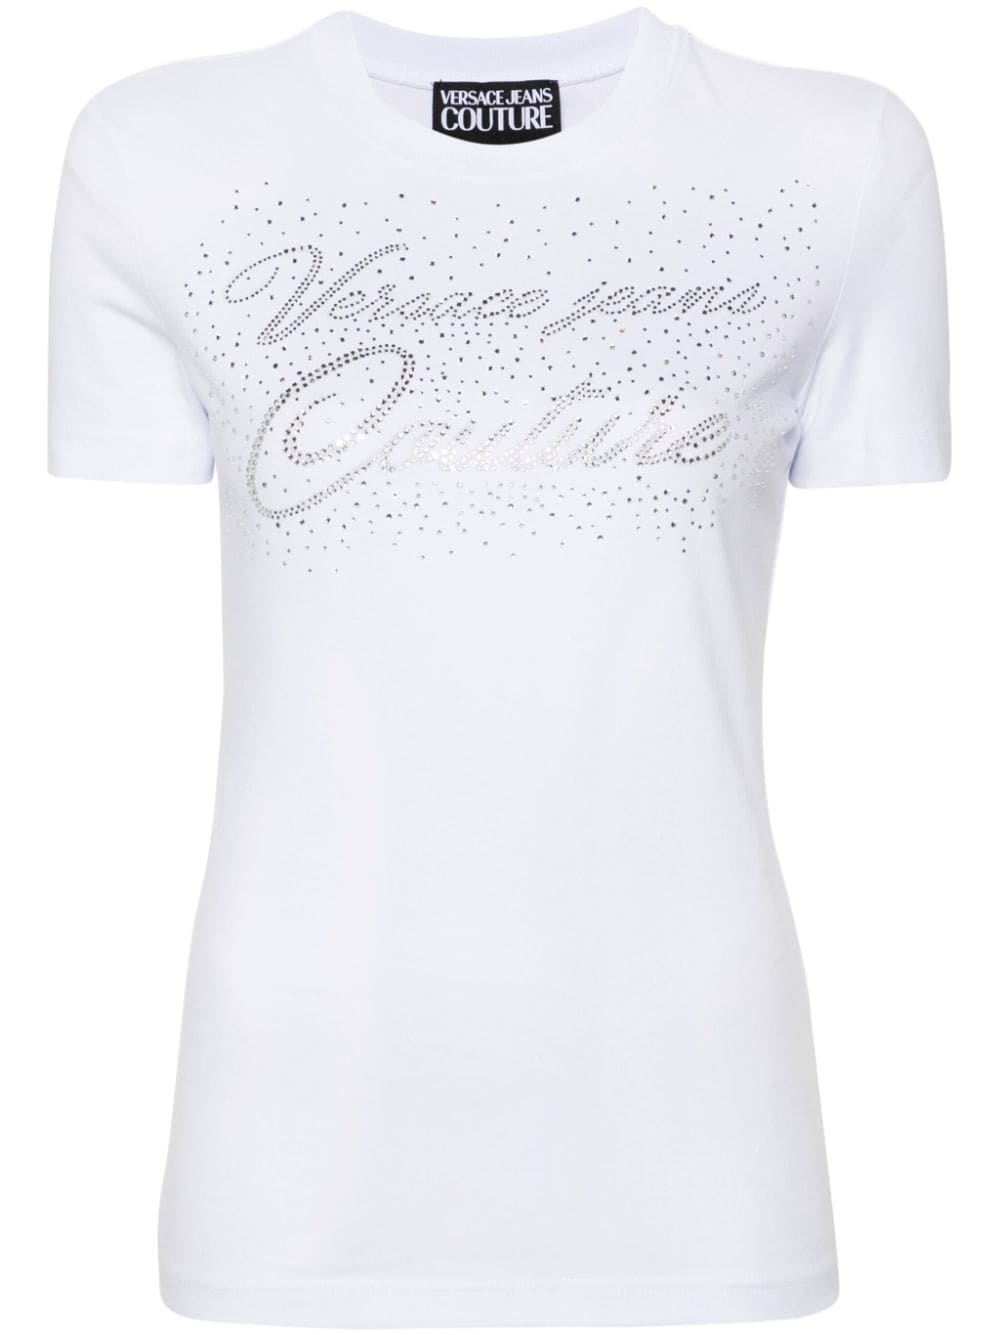 Versace Jeans Couture T-shirt met stras detail Wit